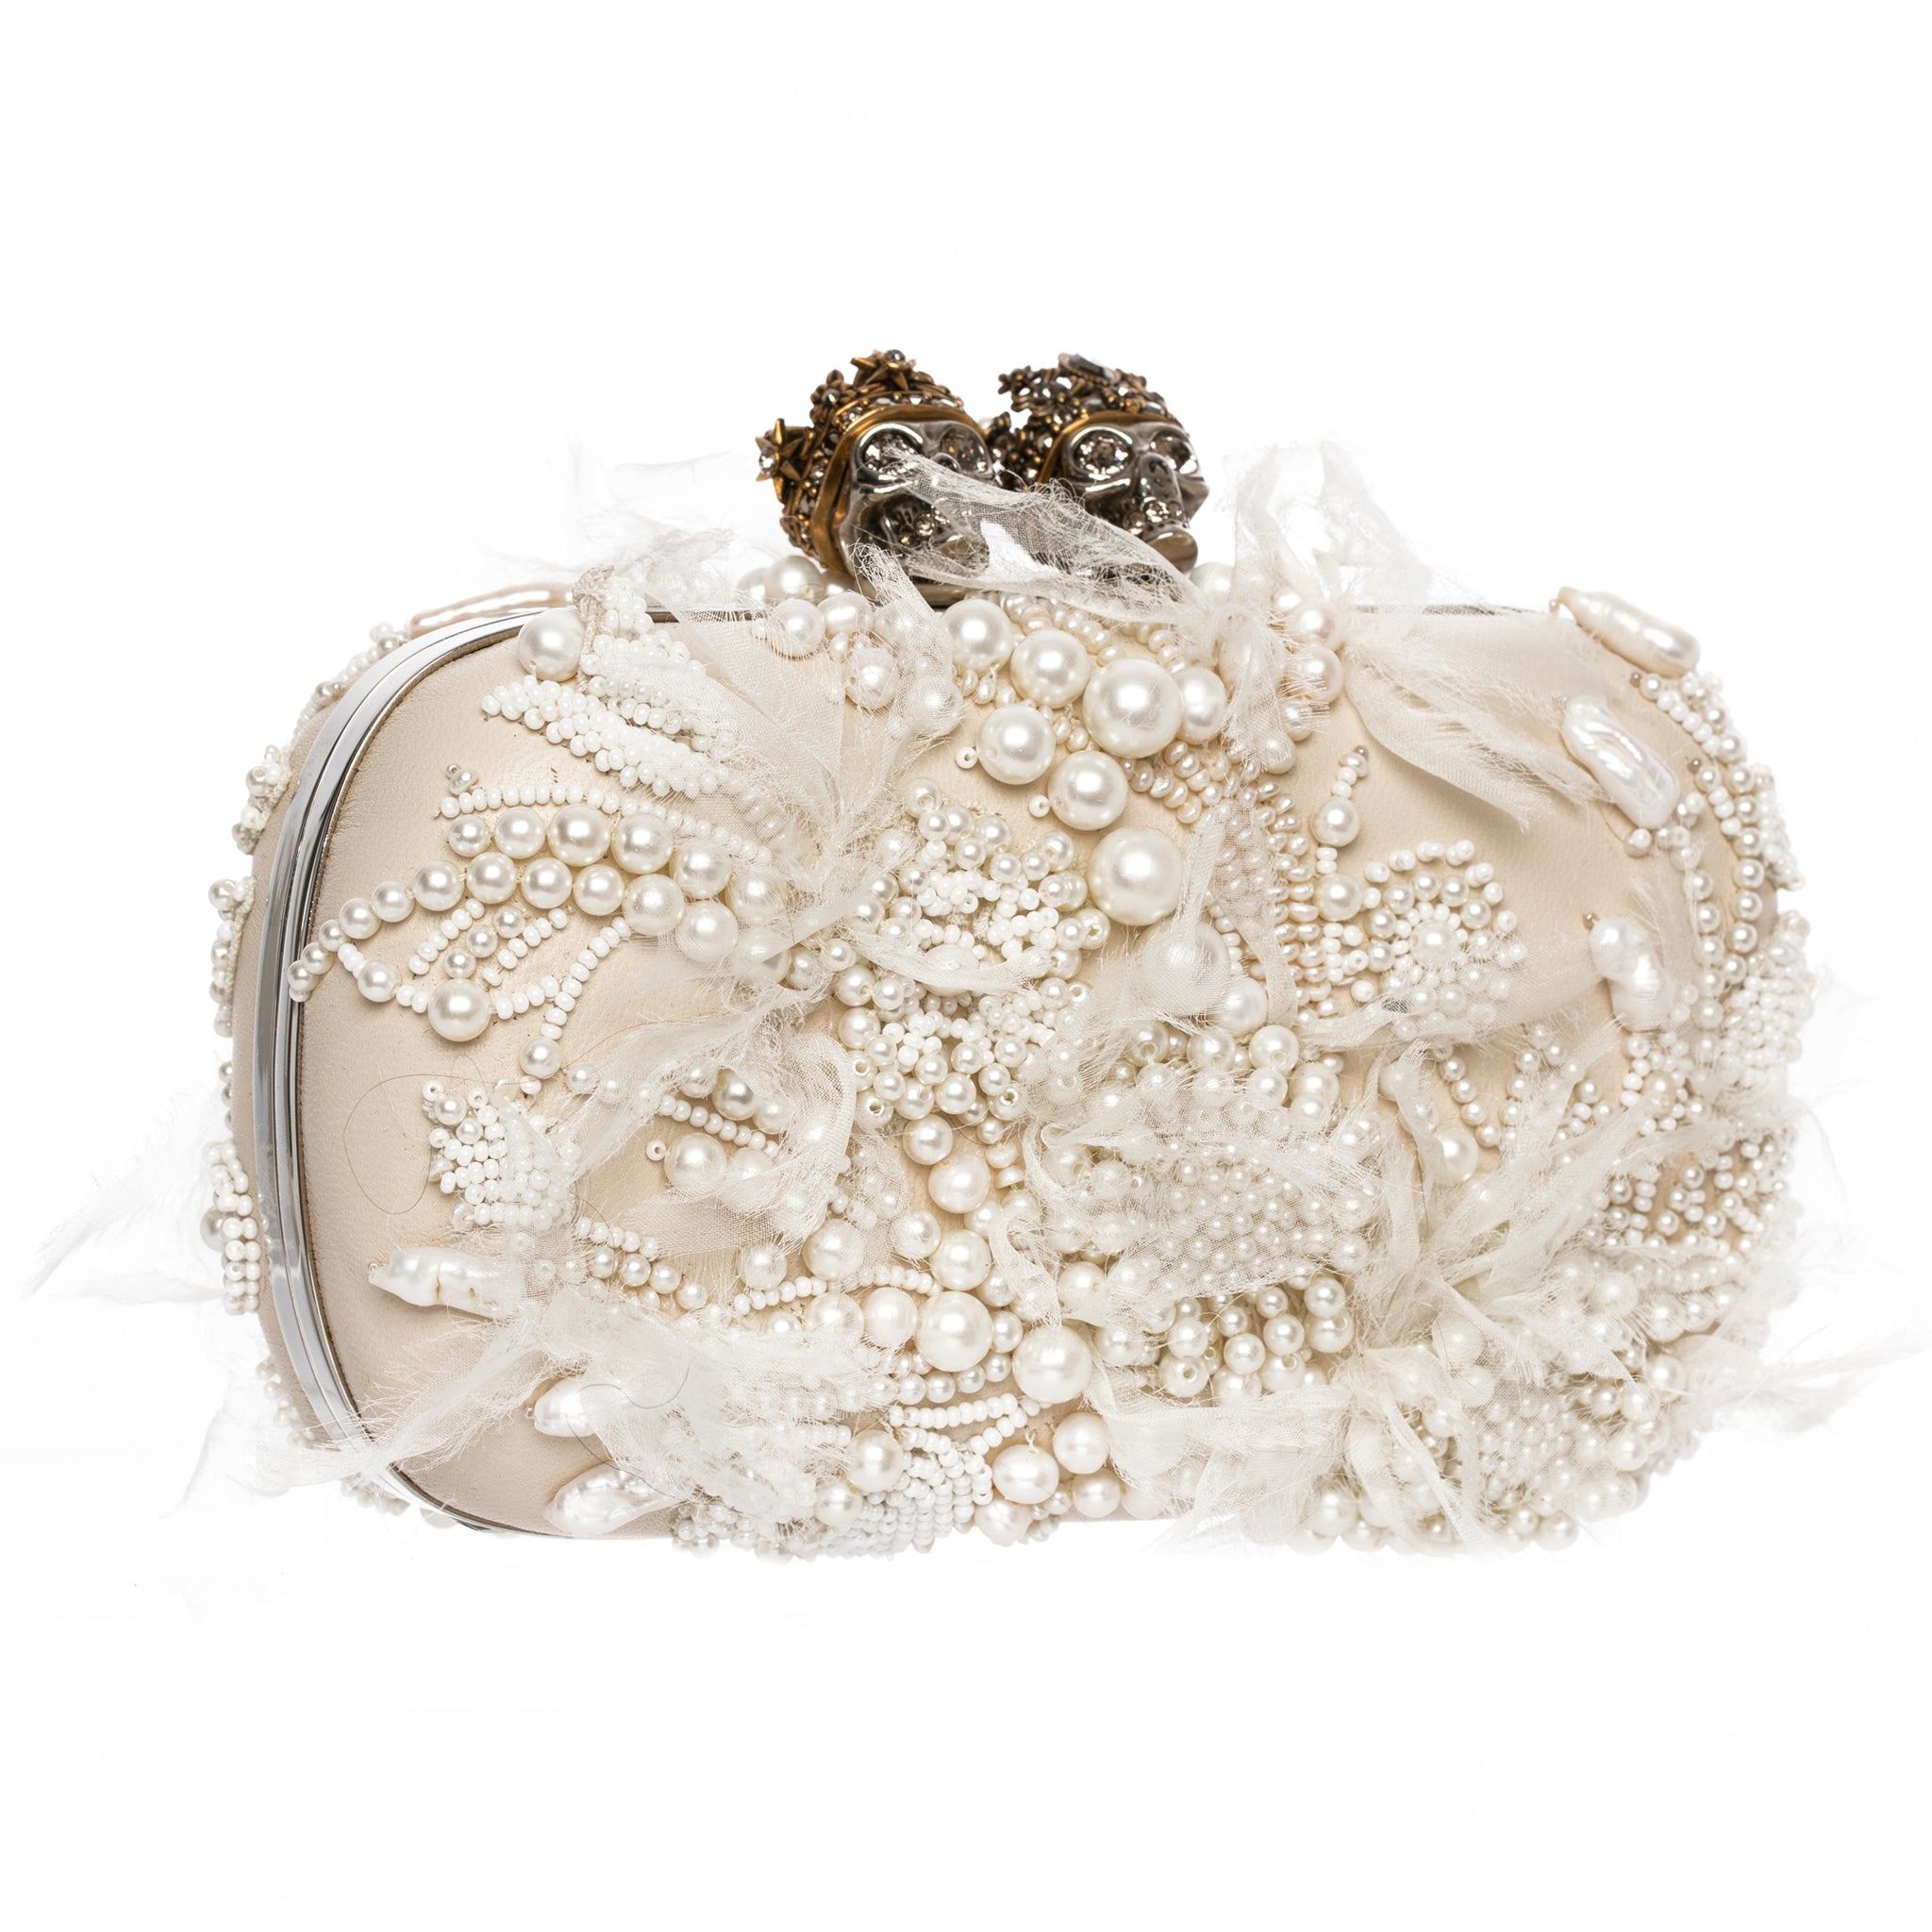 Alexander McQueen Queen & King Ivory Leather, Pearl, Crystal & Silk Clutch Silver Tone Hardware